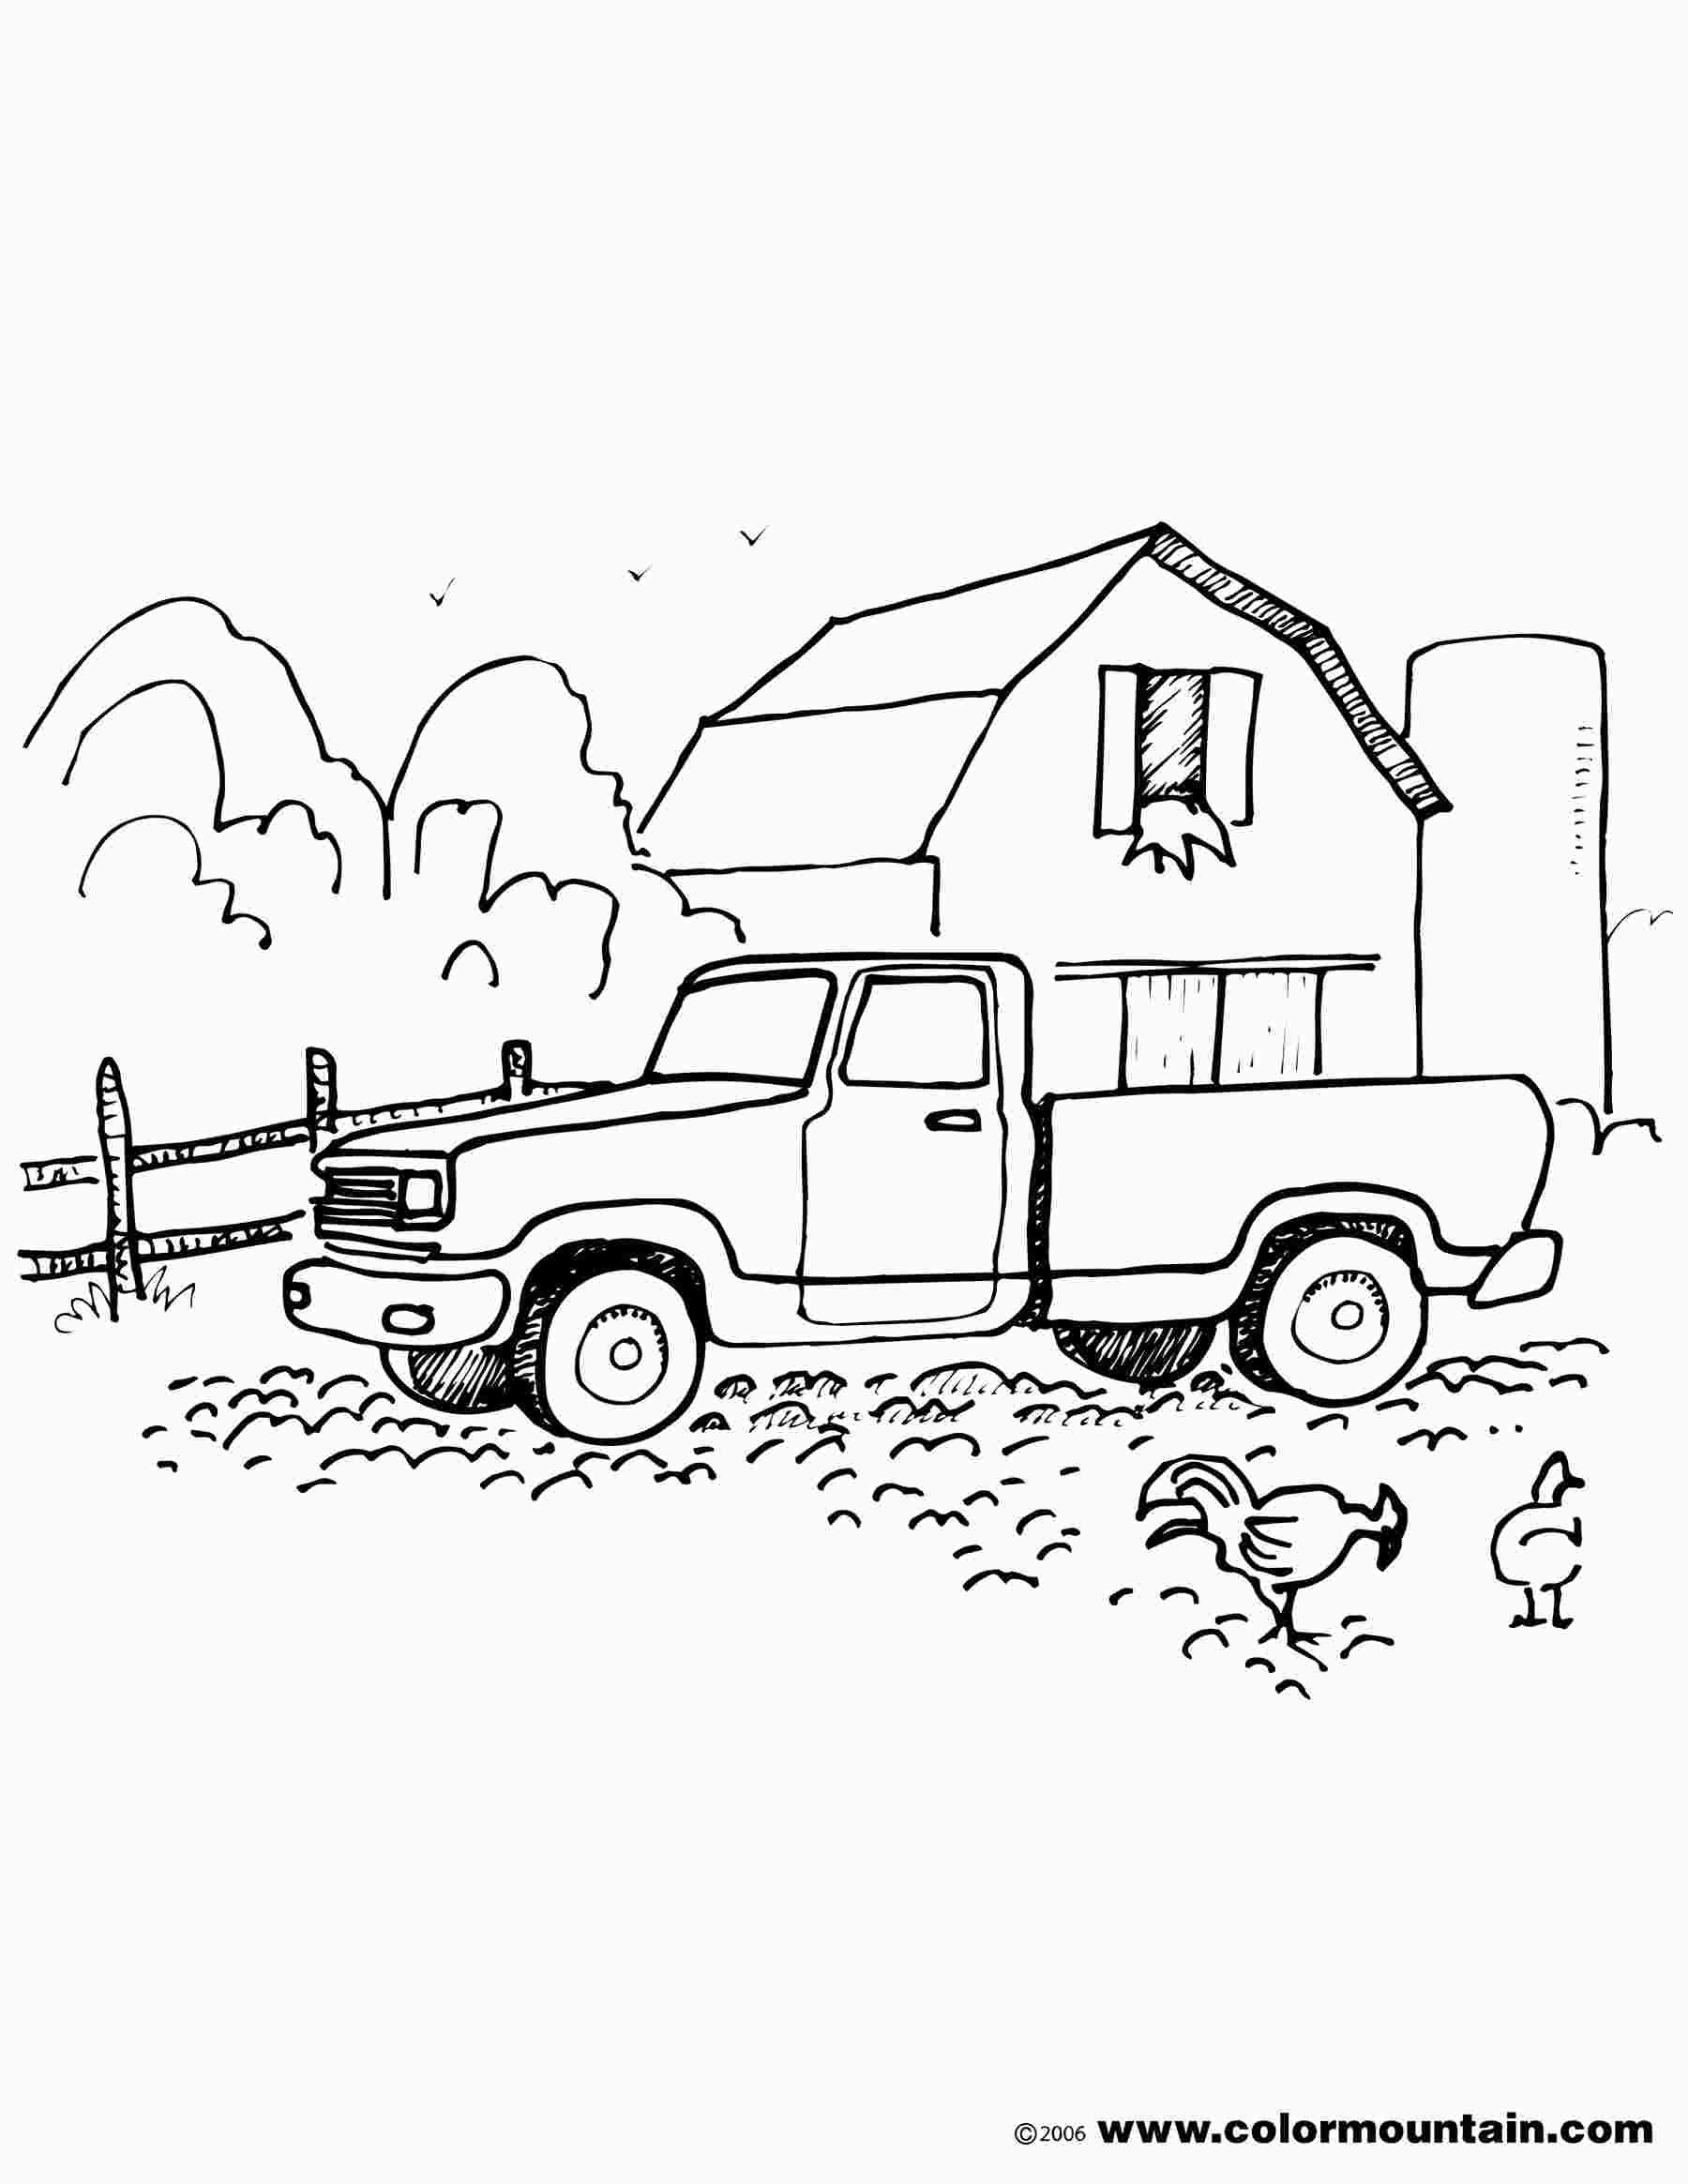 Farm Truck Coloring Trucks Old Decimal Practice Math Test Mathworks 6th  Grade Farm Truck Coloring Pages Coloring Pages measurement worksheets grade  3 reading activities worksheets x y graph foto math math 10